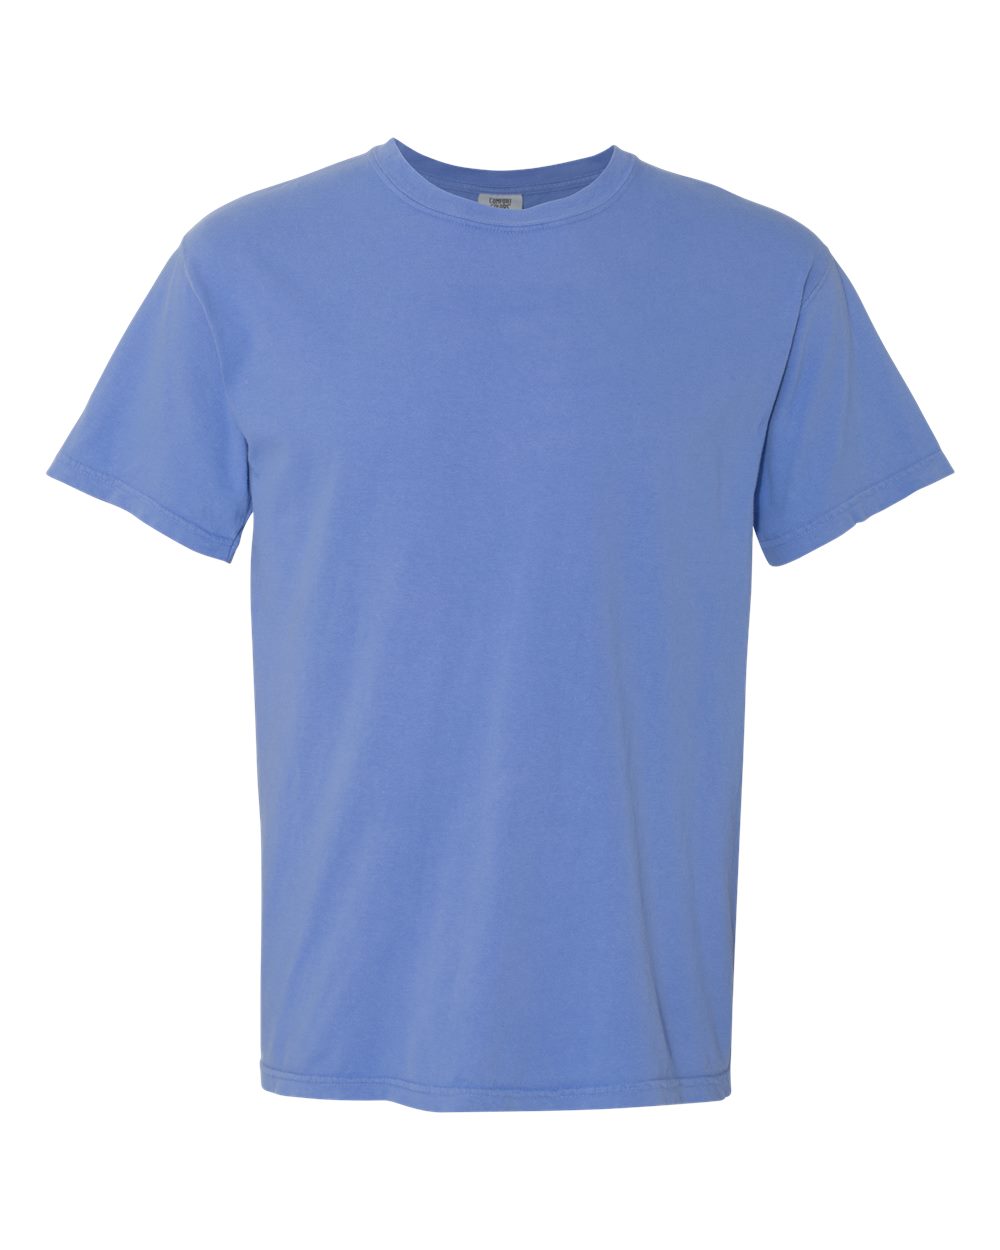 Comfort Colors Garment-Dyed Tee (1717) in Mystic Blue